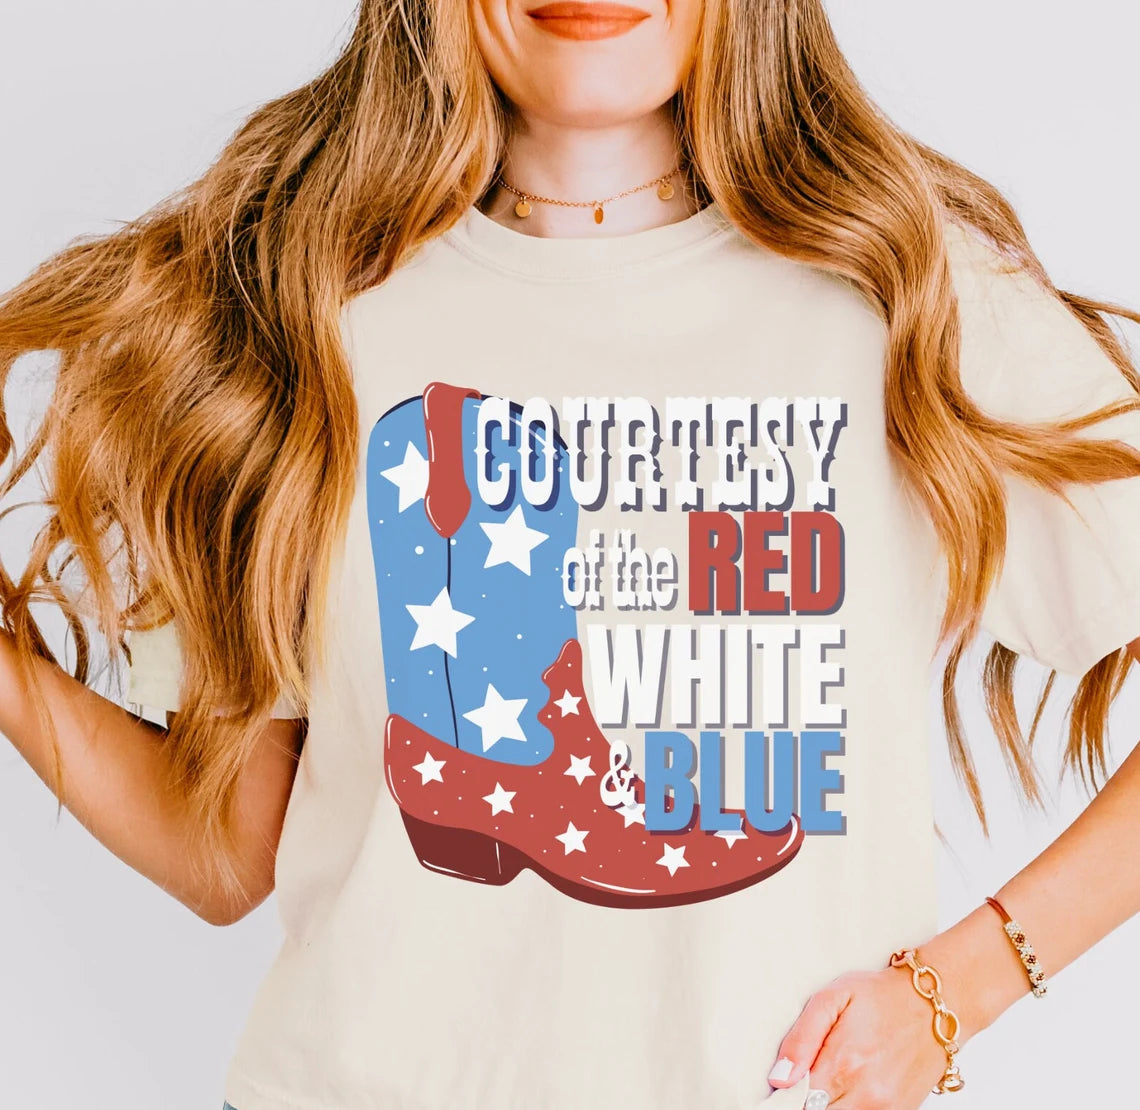 Courtesy of the Red White and Blue Graphic Tee